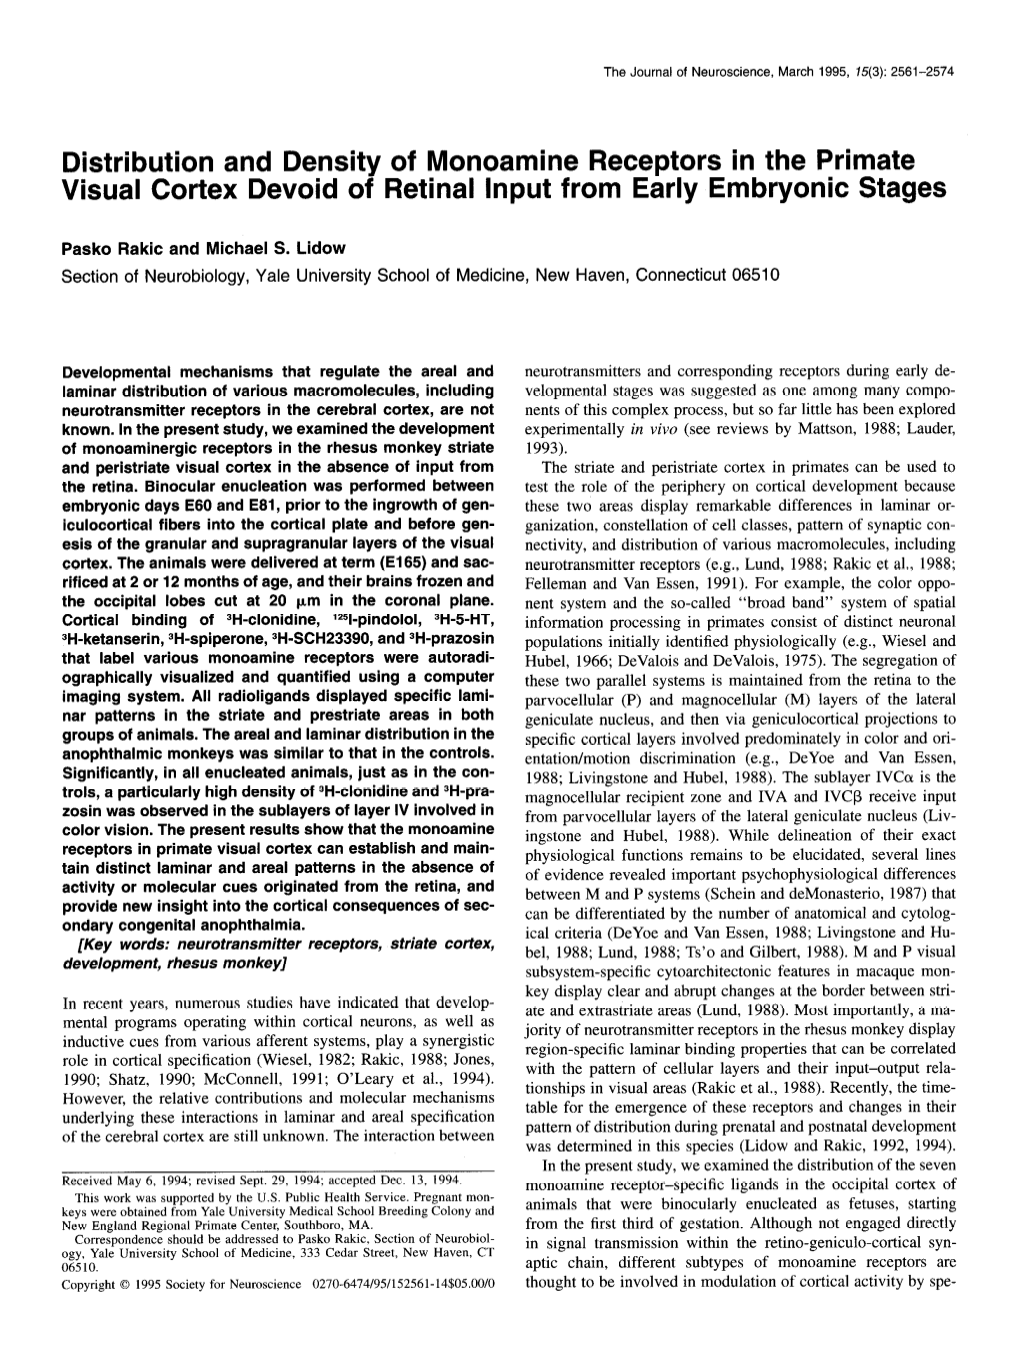 Distribution and Density of Monoamine Receptors in the Primate Visual Cortex Devoid of Retinal Input from Early Embryonic Stages